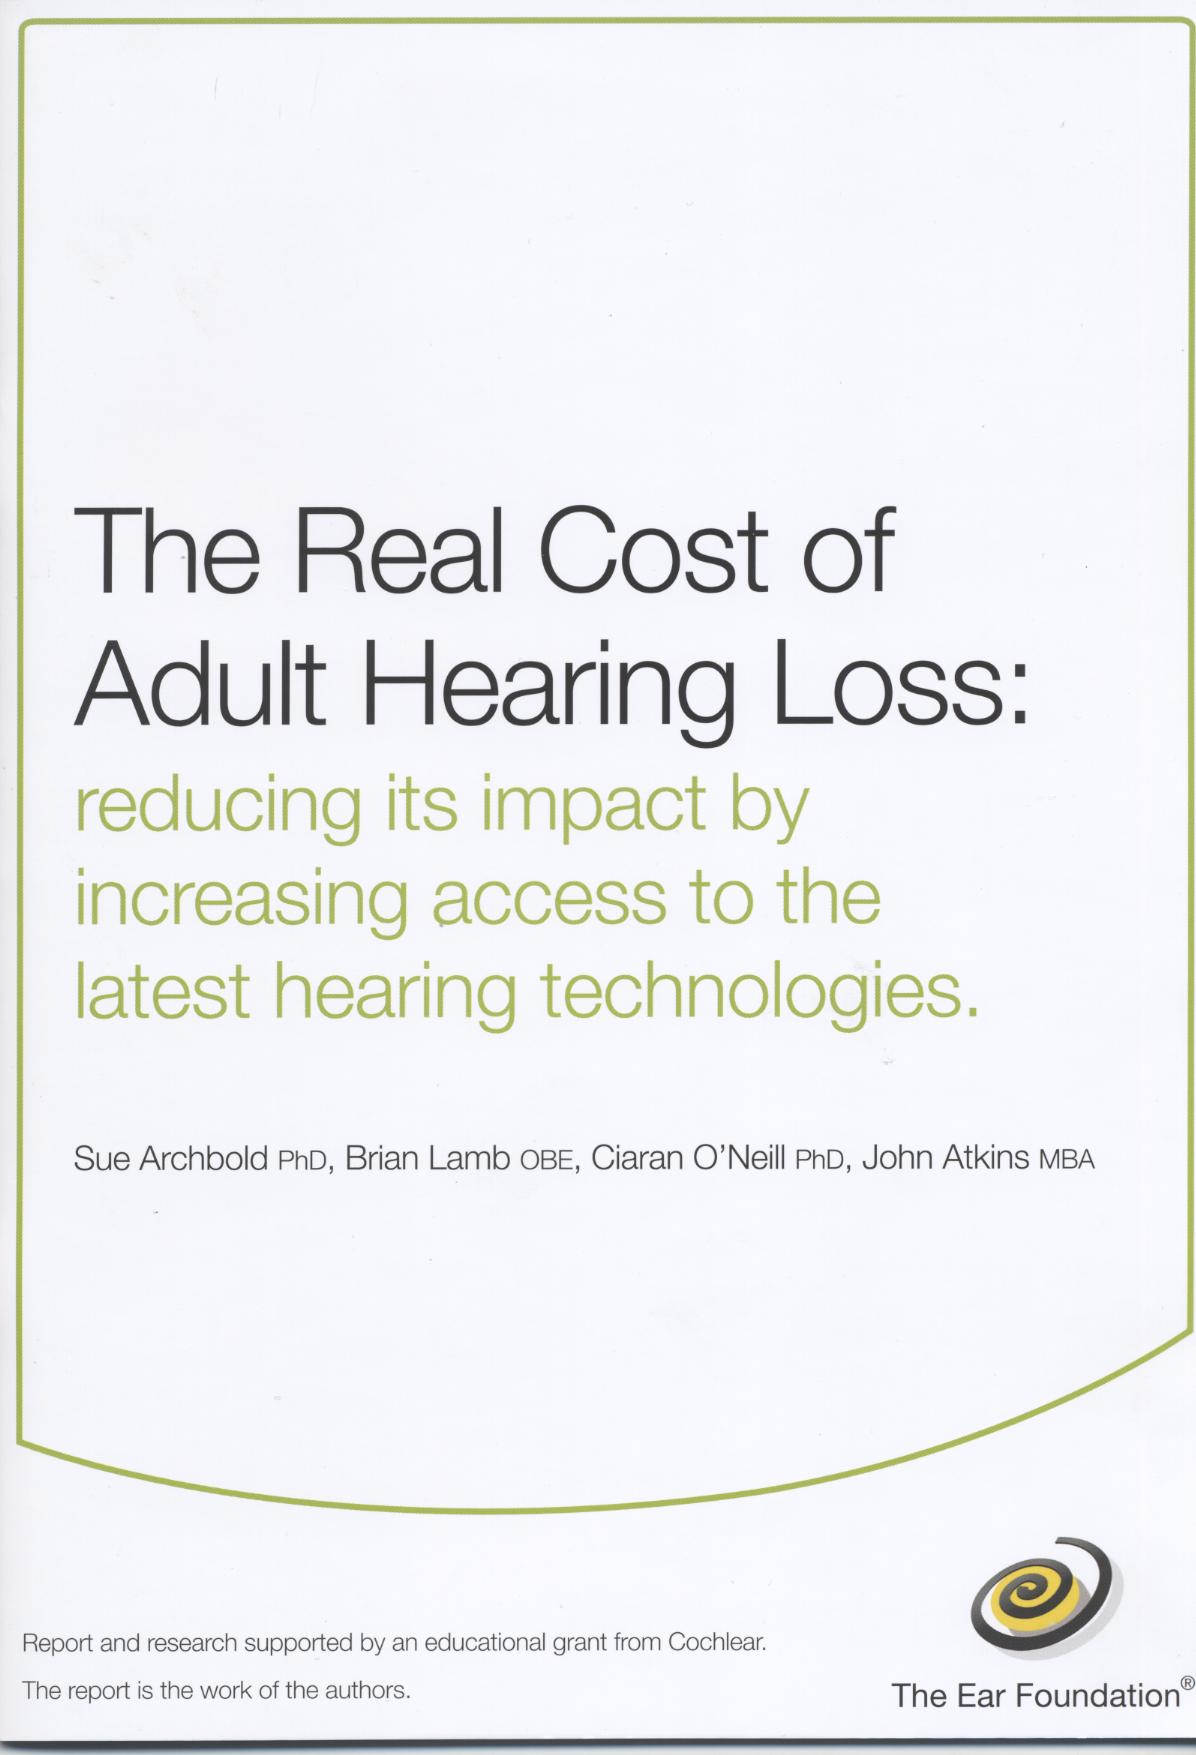 The Real Cost of Hearing Loss